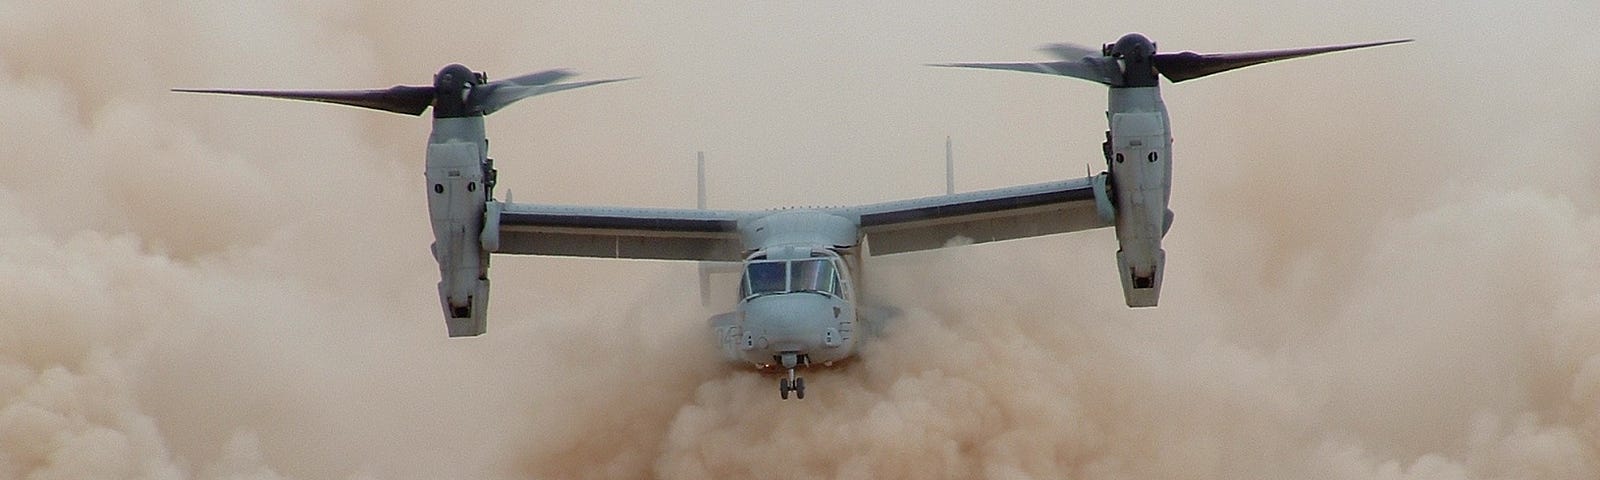 A CV-22 aircraft flying in a dust cloud.